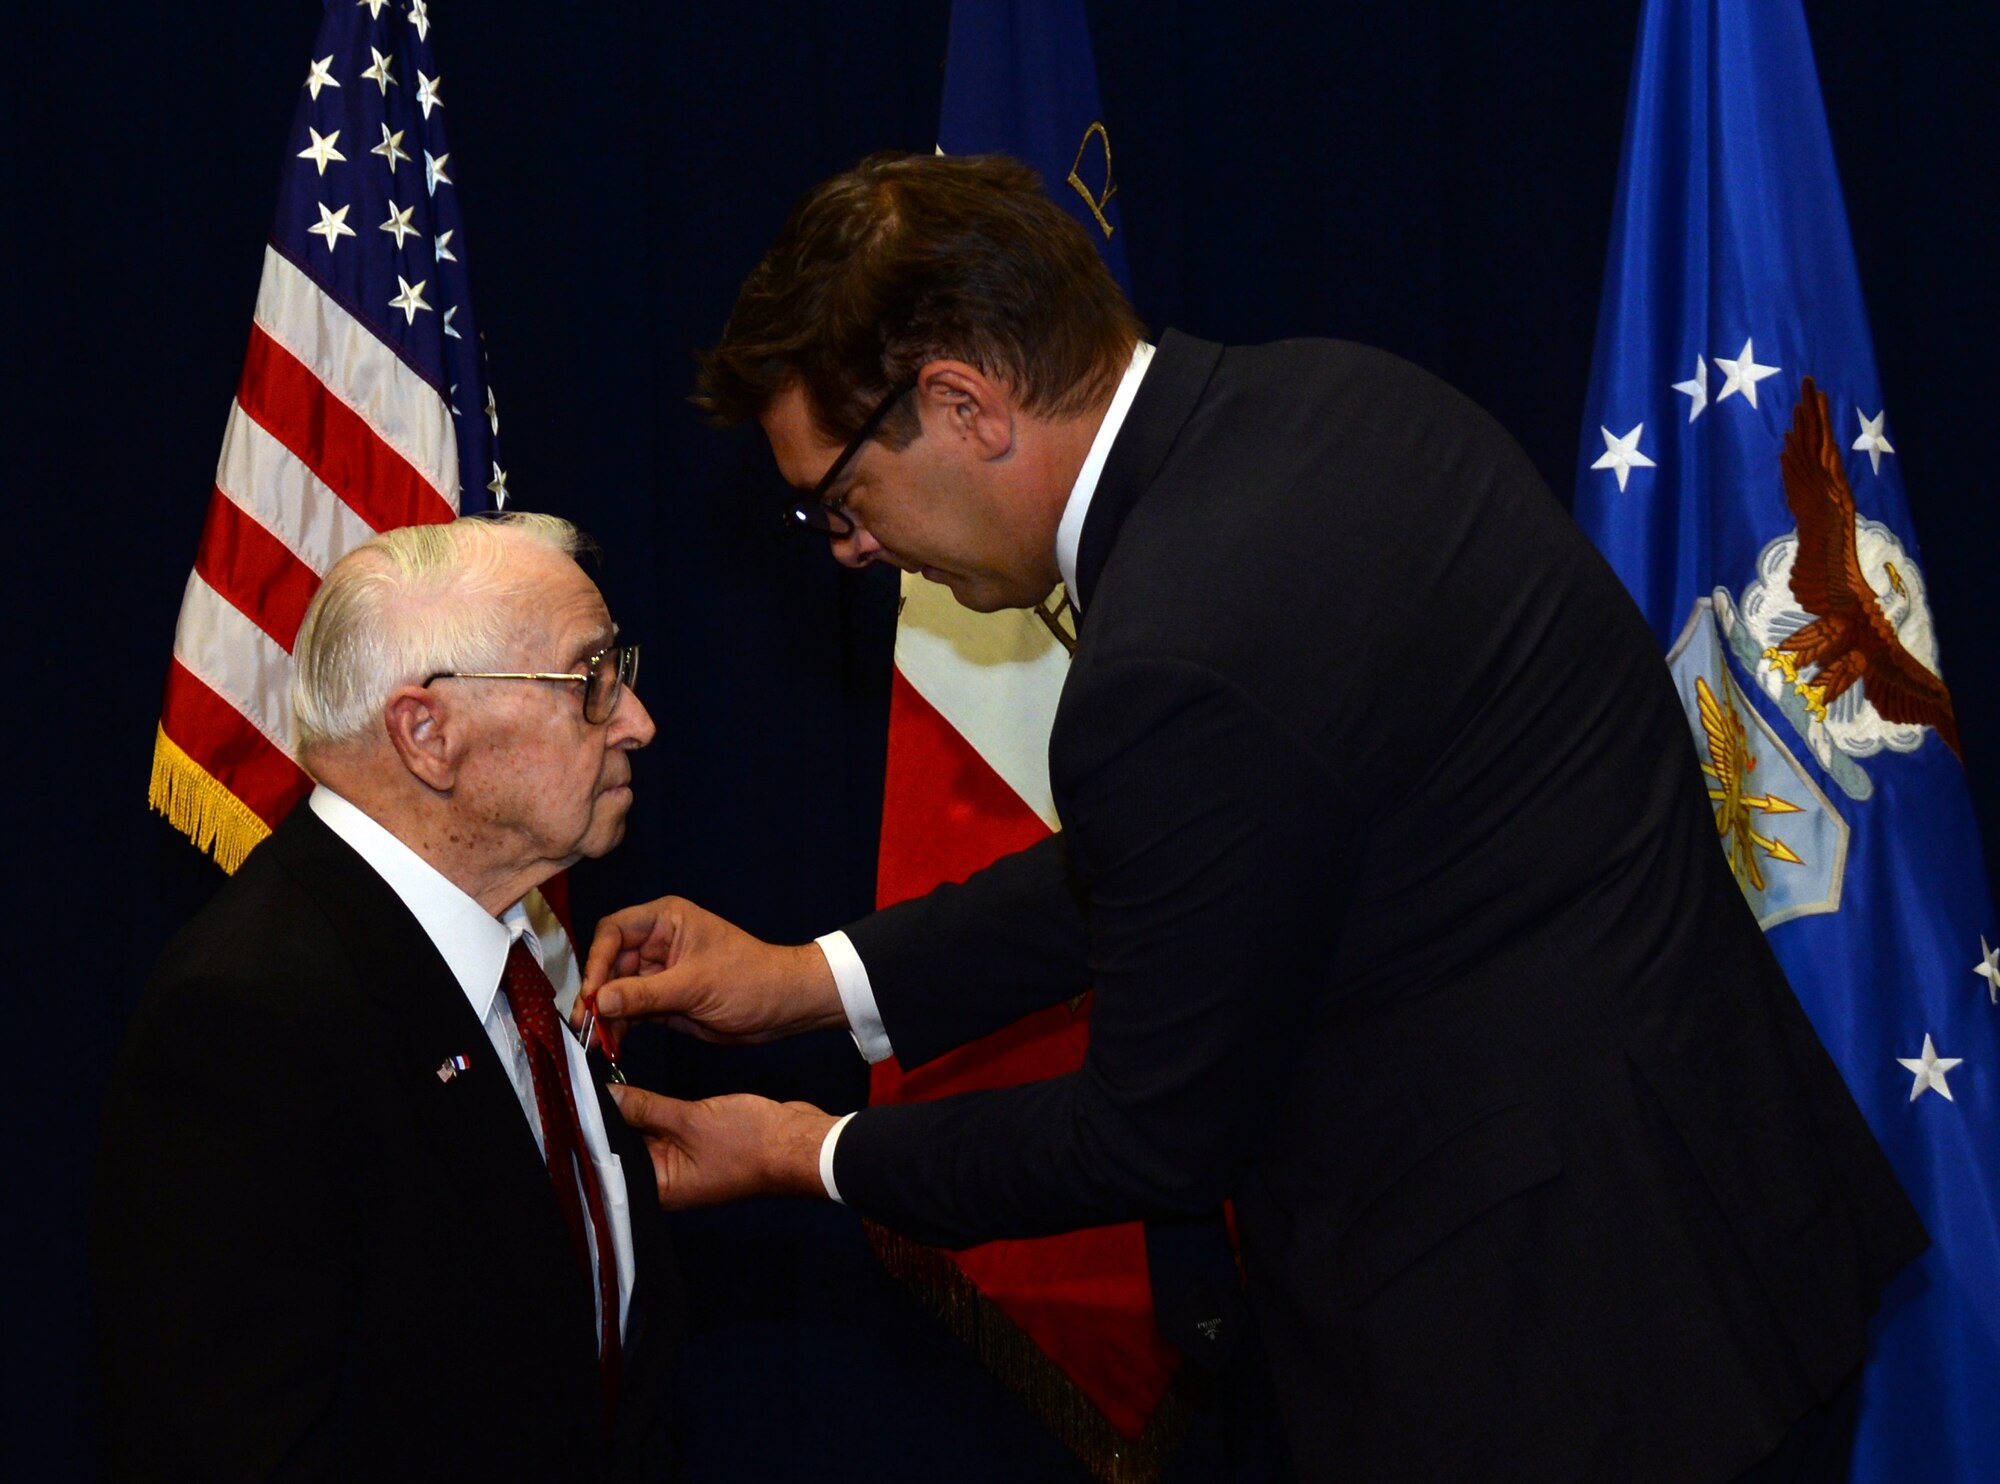 Christophe Lemoine, French consul general in Los Angeles, pins the Legion of Honor medal on retired Air Force Reserve Maj. Raymond “Glenn” Clanin. The medal is the French government's highest distinction for military service as a World War II veteran. (U.S. Air Force photo/Van De Ha)